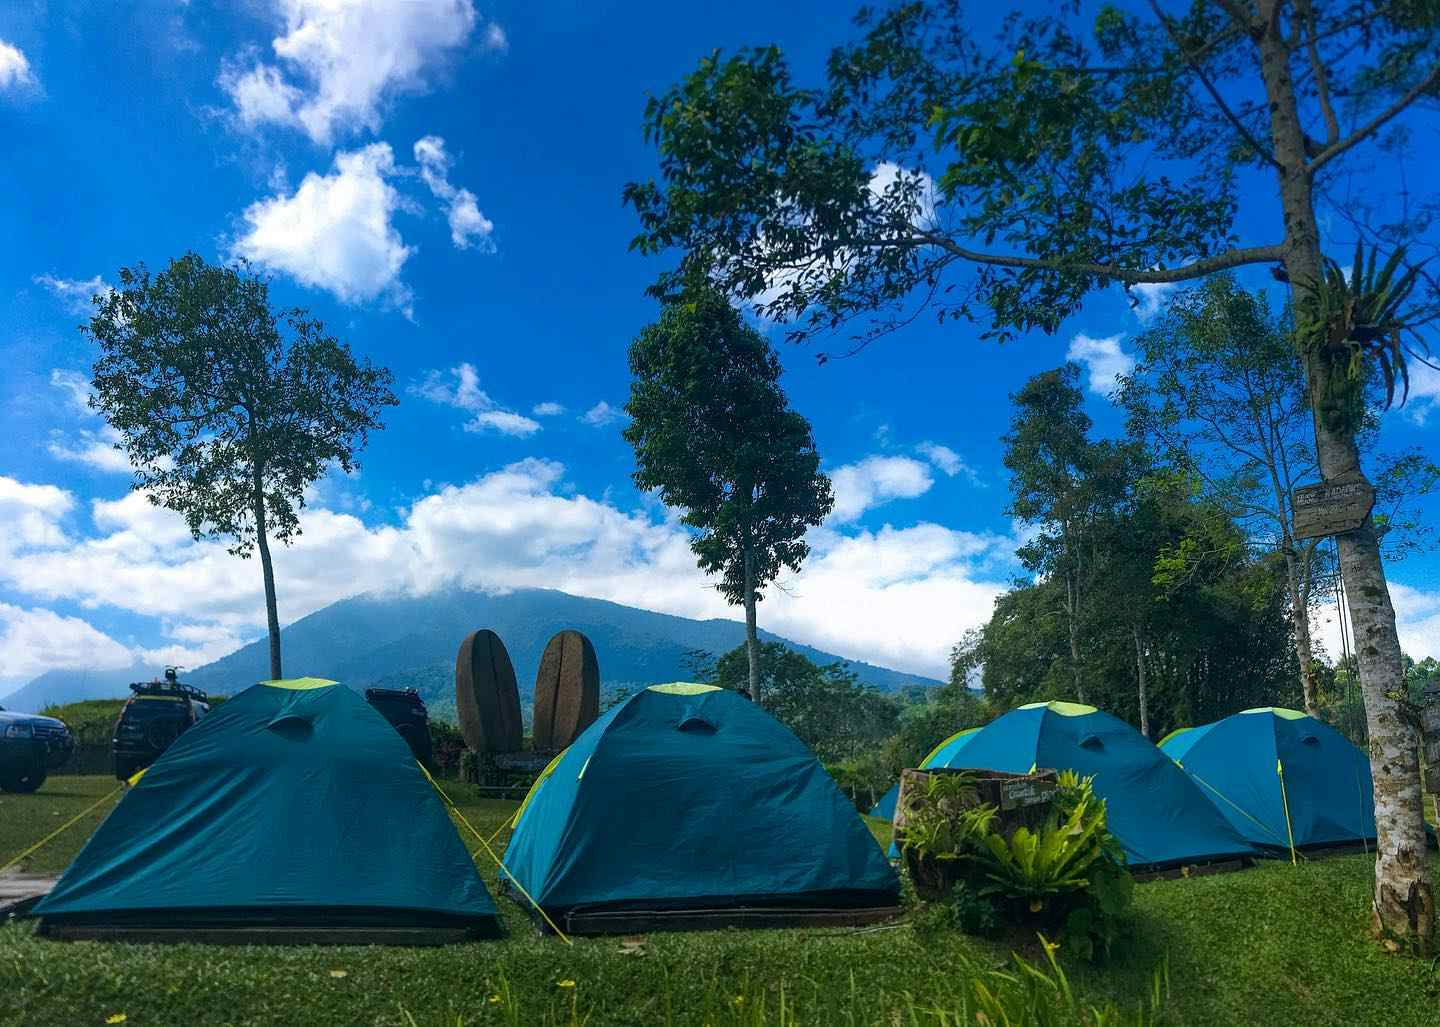 Tents with a mountain in the background, Bali